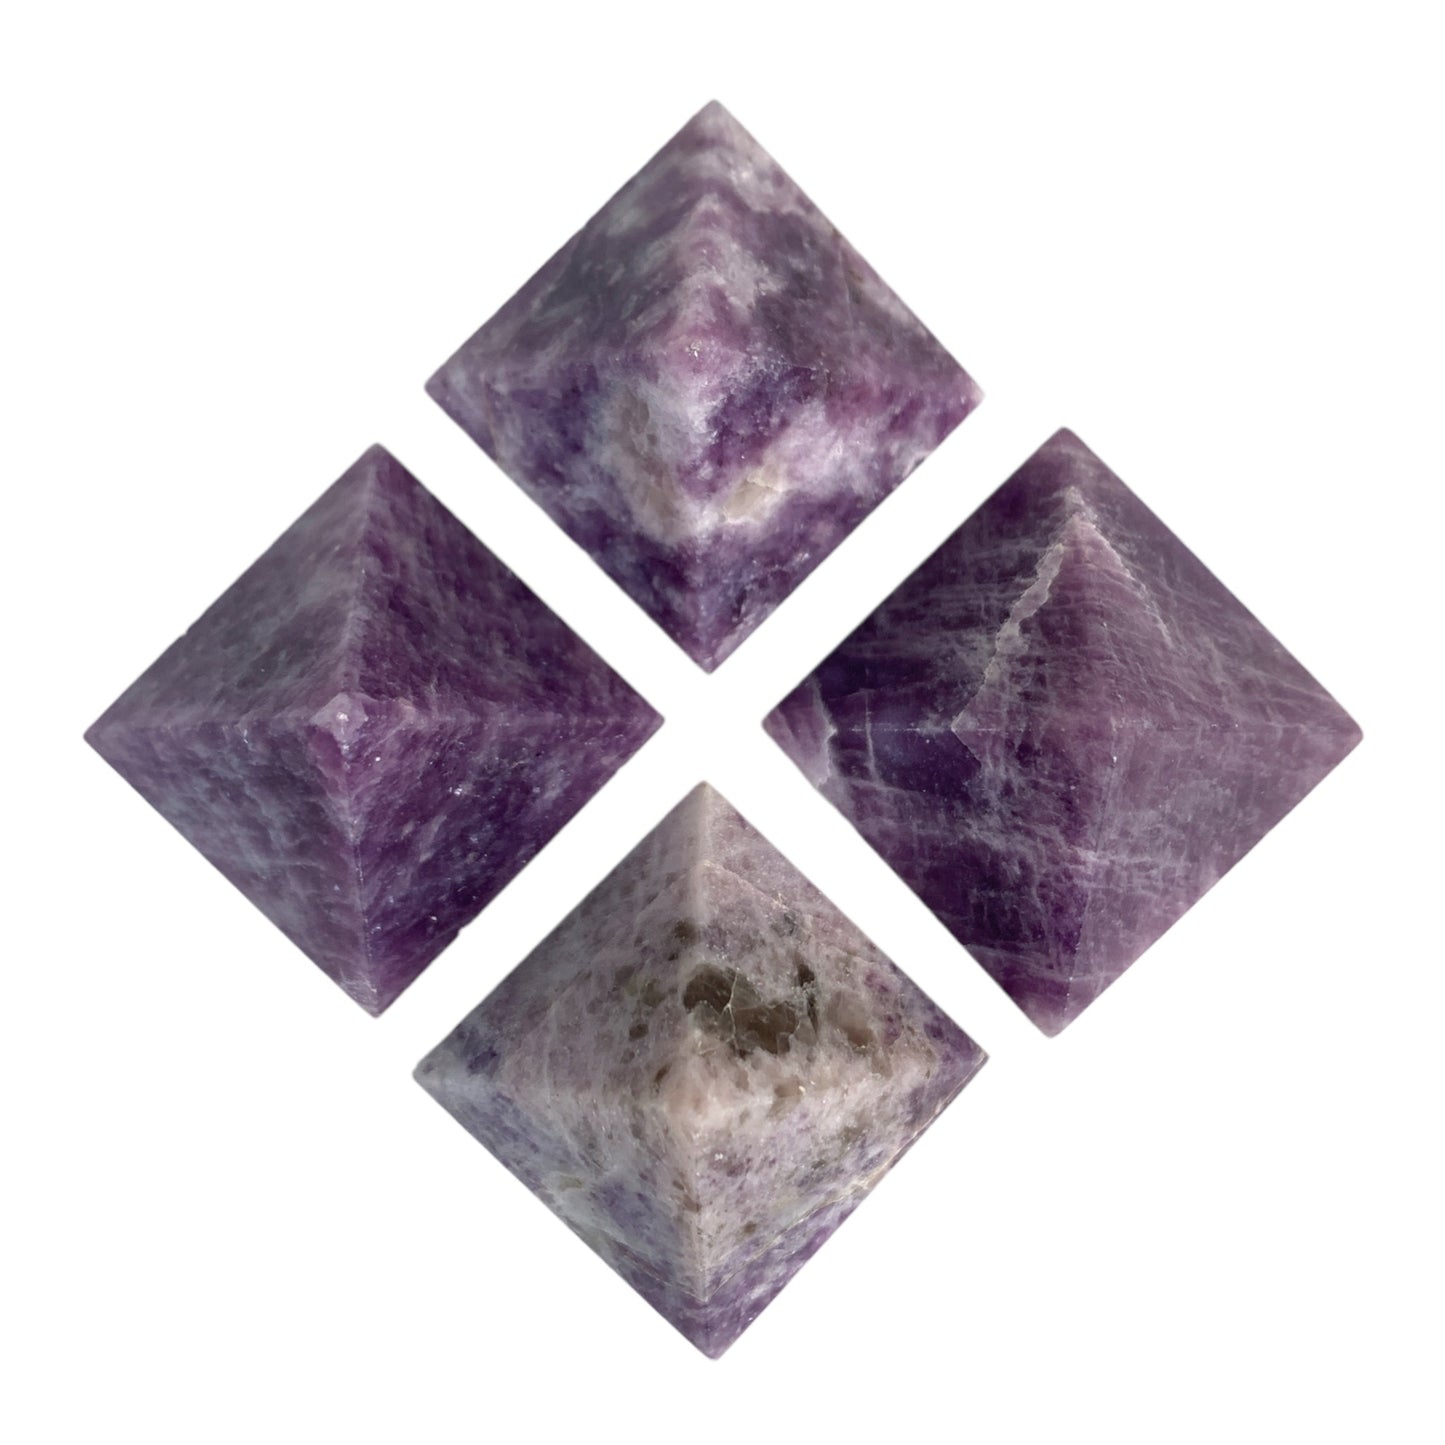 Lepidolite - Small Pyramids - 23 to 28mm - Price per piece 15g - Order in 5's - NEW422